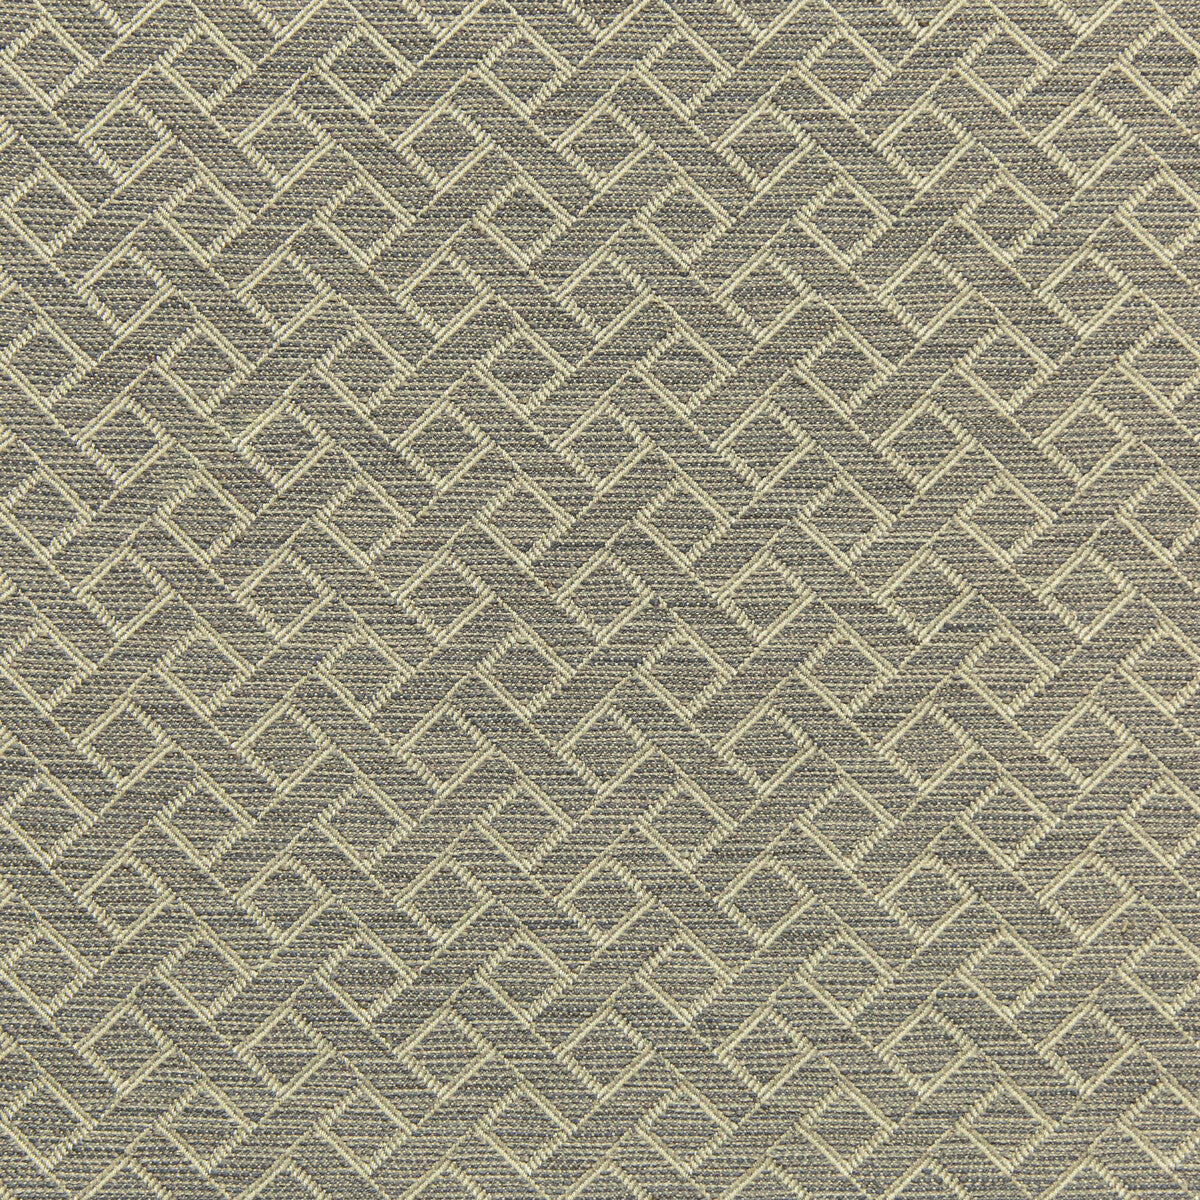 Maldon Weave fabric in pebble color - pattern 2020102.1121.0 - by Lee Jofa in the Linford Weaves collection